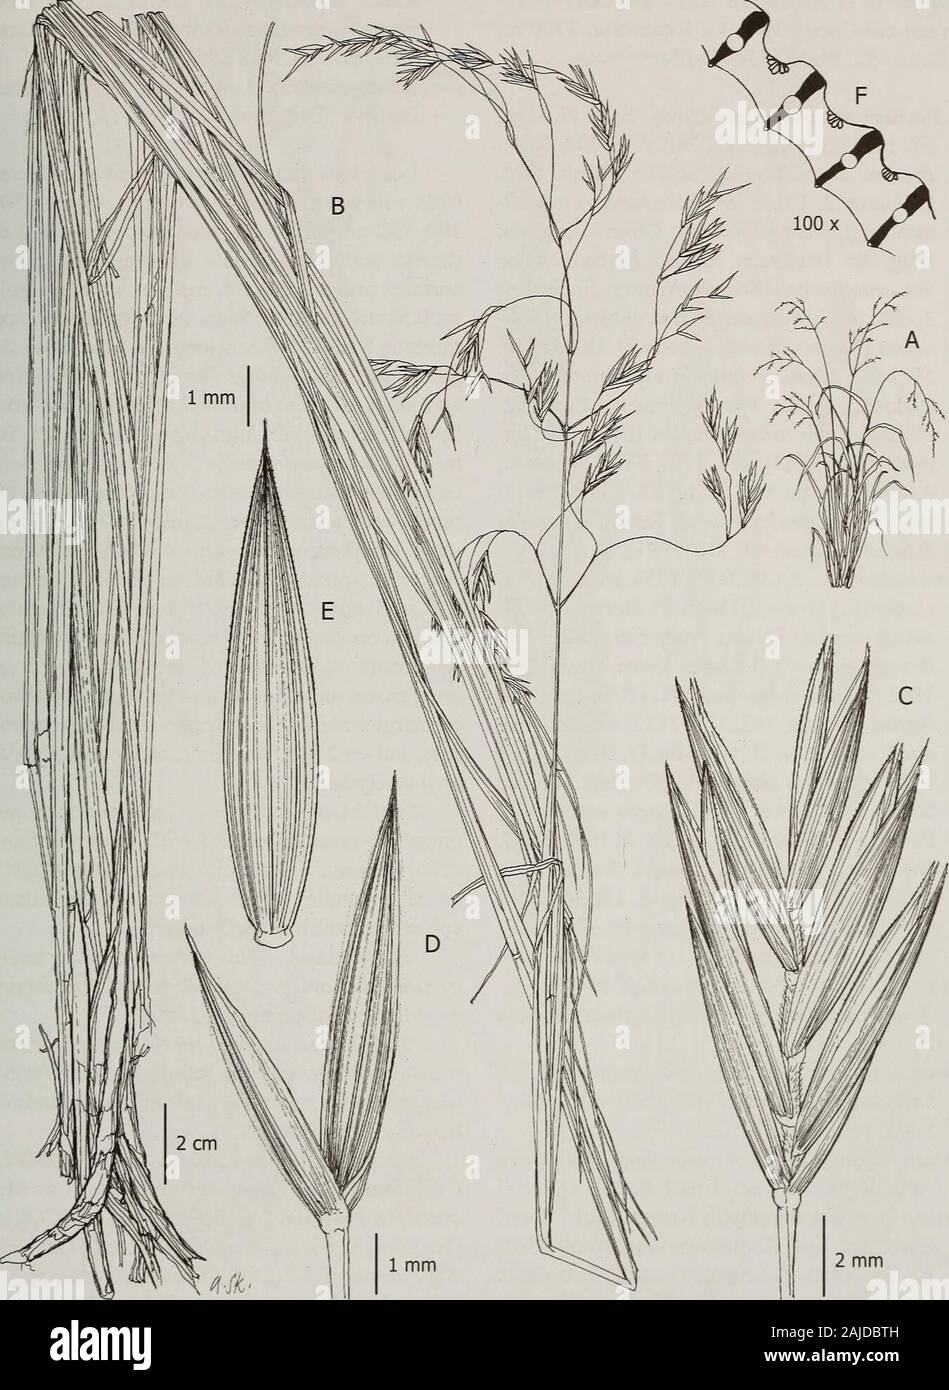 Contributions from the United States National Herbarium . as long as the lemma, membranous, papil-lose; anthers 3.5-4 mm long; ovary apex sparselyshort-hairy. Caryopses not seen. Leaf blade anatomy.—Cross-sections withmany vascular bundles and small ribs above; scle-renchyma under both abaxial and adaxial epidermis,discontinuous, extending to the vascular bundlesforming girders; bulliform cells present; epidermiswithout hairs. Observations.—Festuca woodii is morphologi-cally similar to F caldasii known from southernColombia and Ecuador. However, F. woodii hasshorter ligules (0.5 versus 2.5-3 m Stock Photo